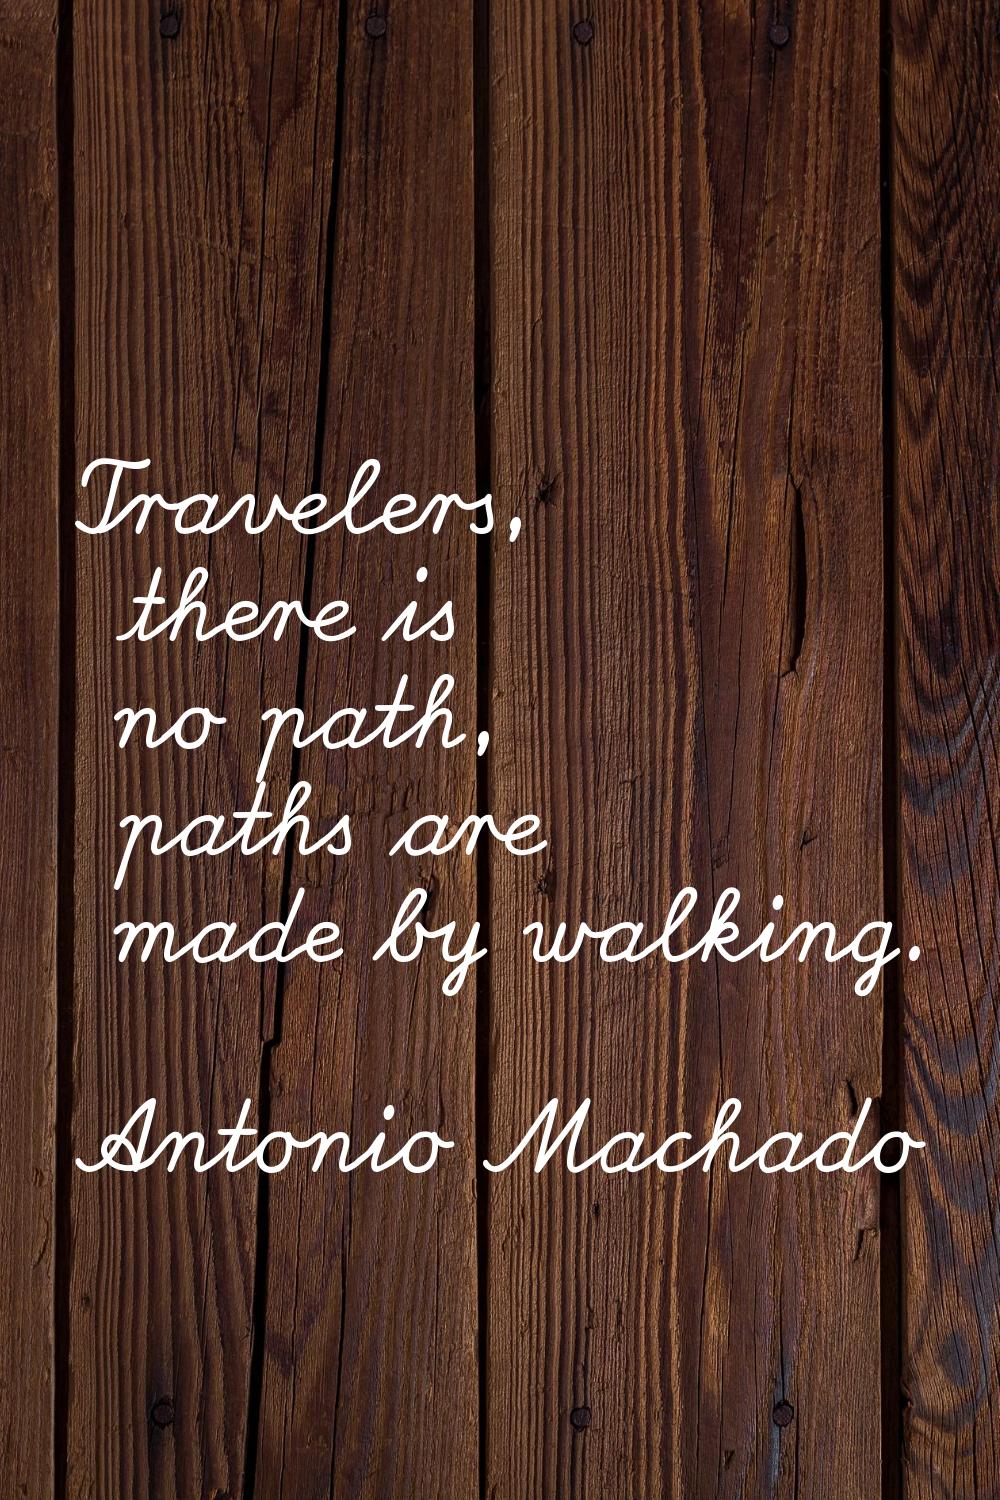 Travelers, there is no path, paths are made by walking.